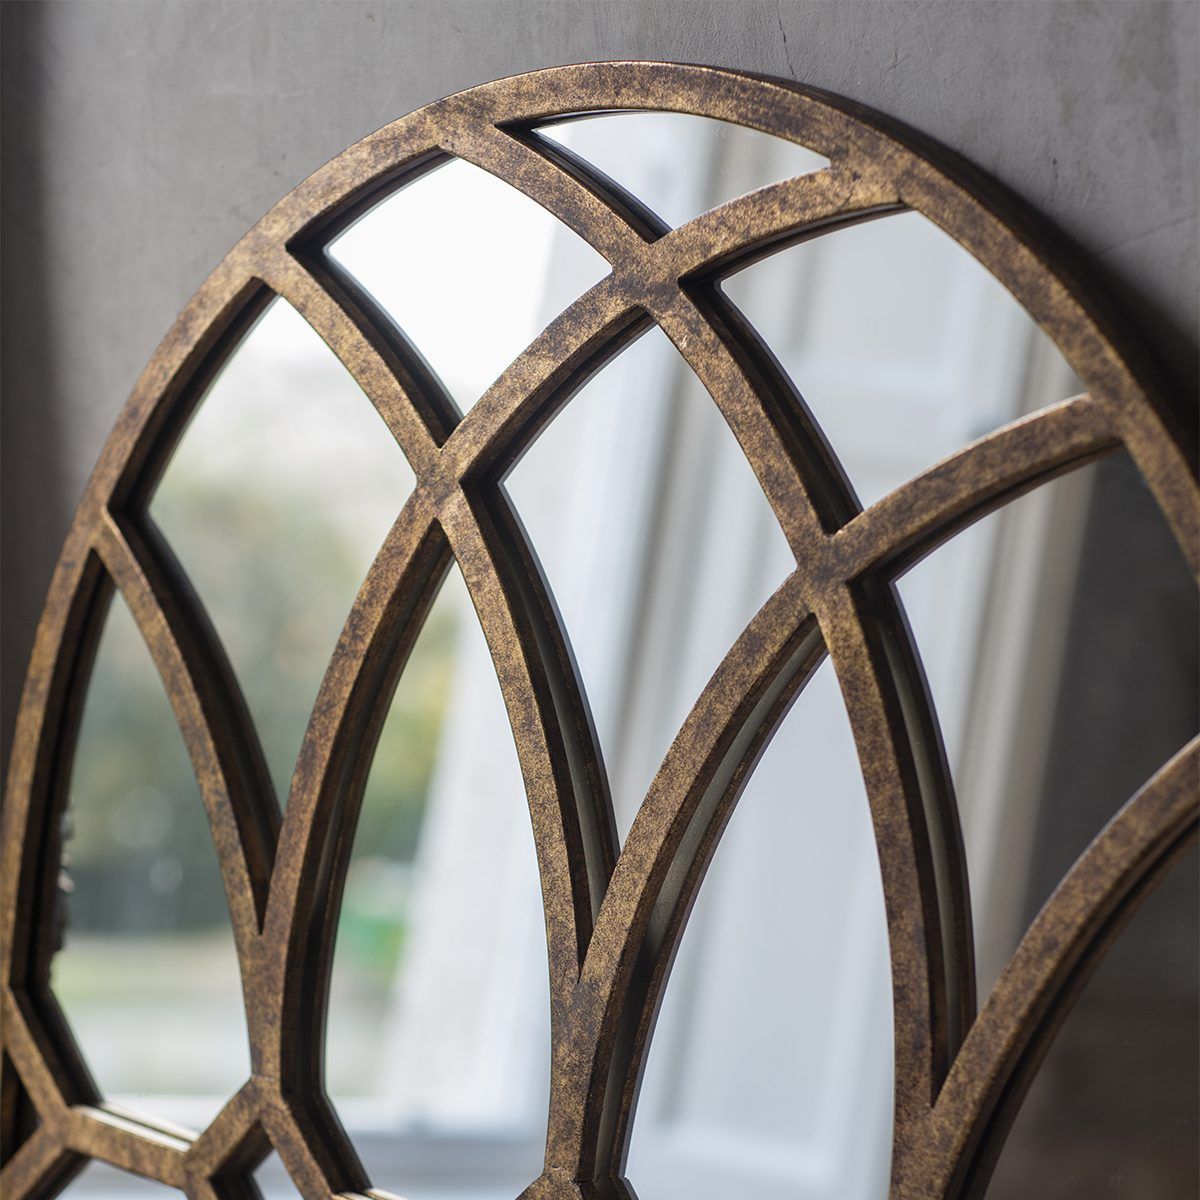 Bronze Gothic Arched Window Wall Mirror | Primrose & Plum Intended For Bronze Arch Top Wall Mirrors (View 15 of 15)